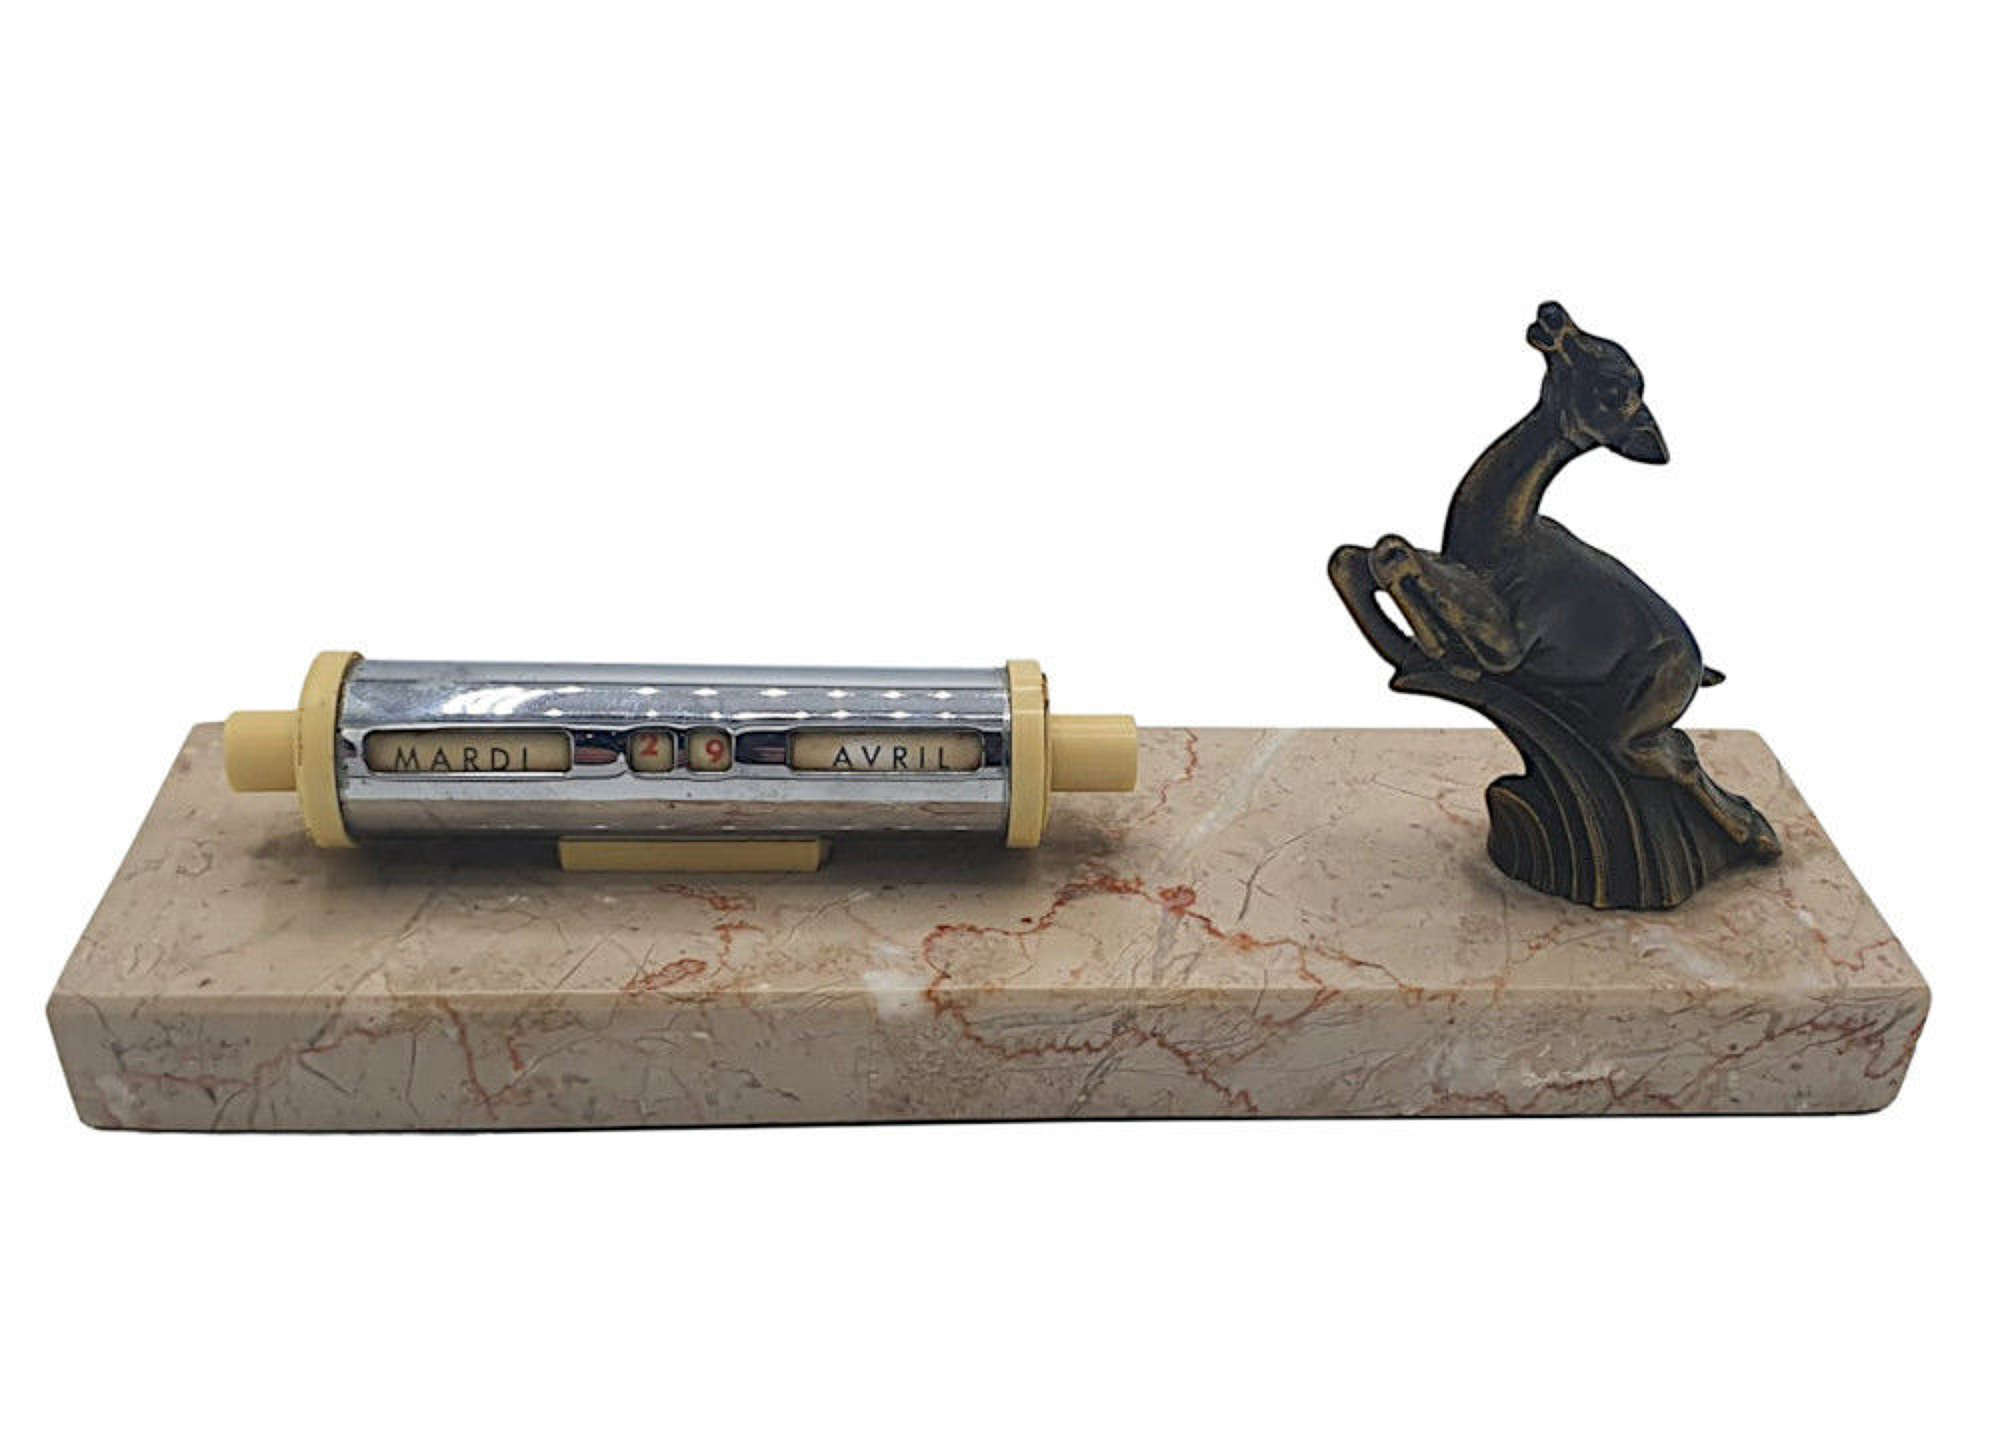 A Lovely French Art Deco Perpetual Desk Calendar With A Bronze Leaping